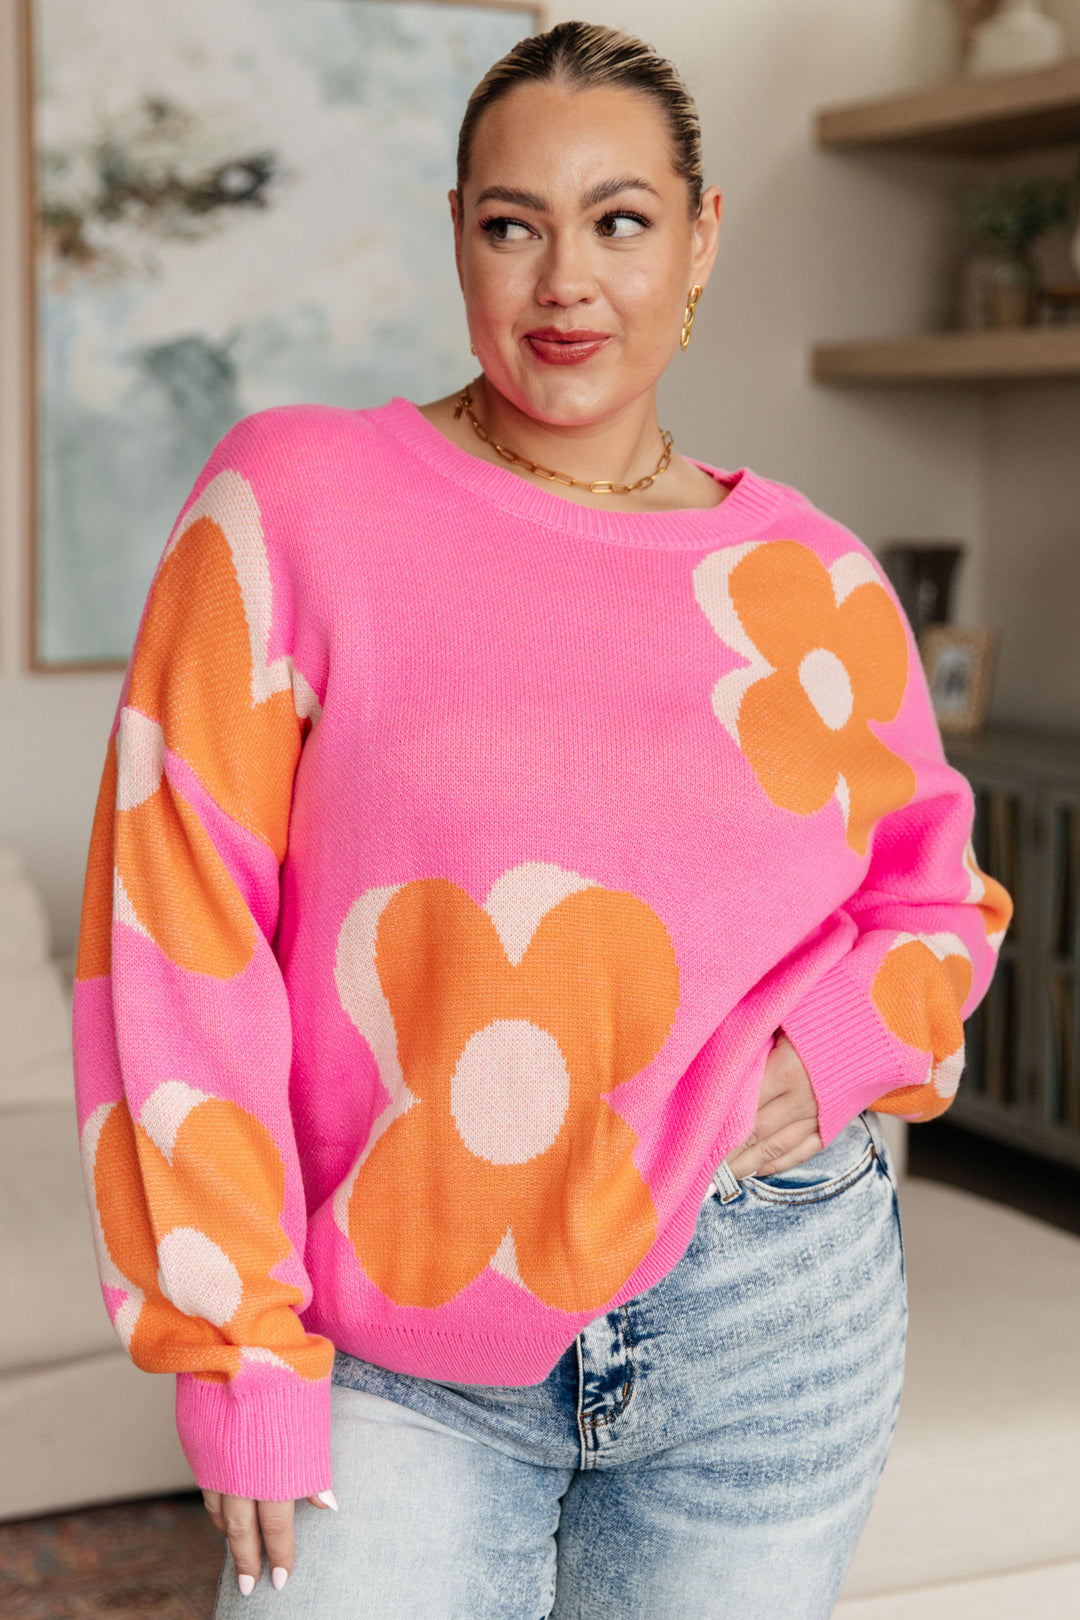 Quietly Bold Mod Floral Sweater-Sweaters/Sweatshirts-Inspired by Justeen-Women's Clothing Boutique in Chicago, Illinois